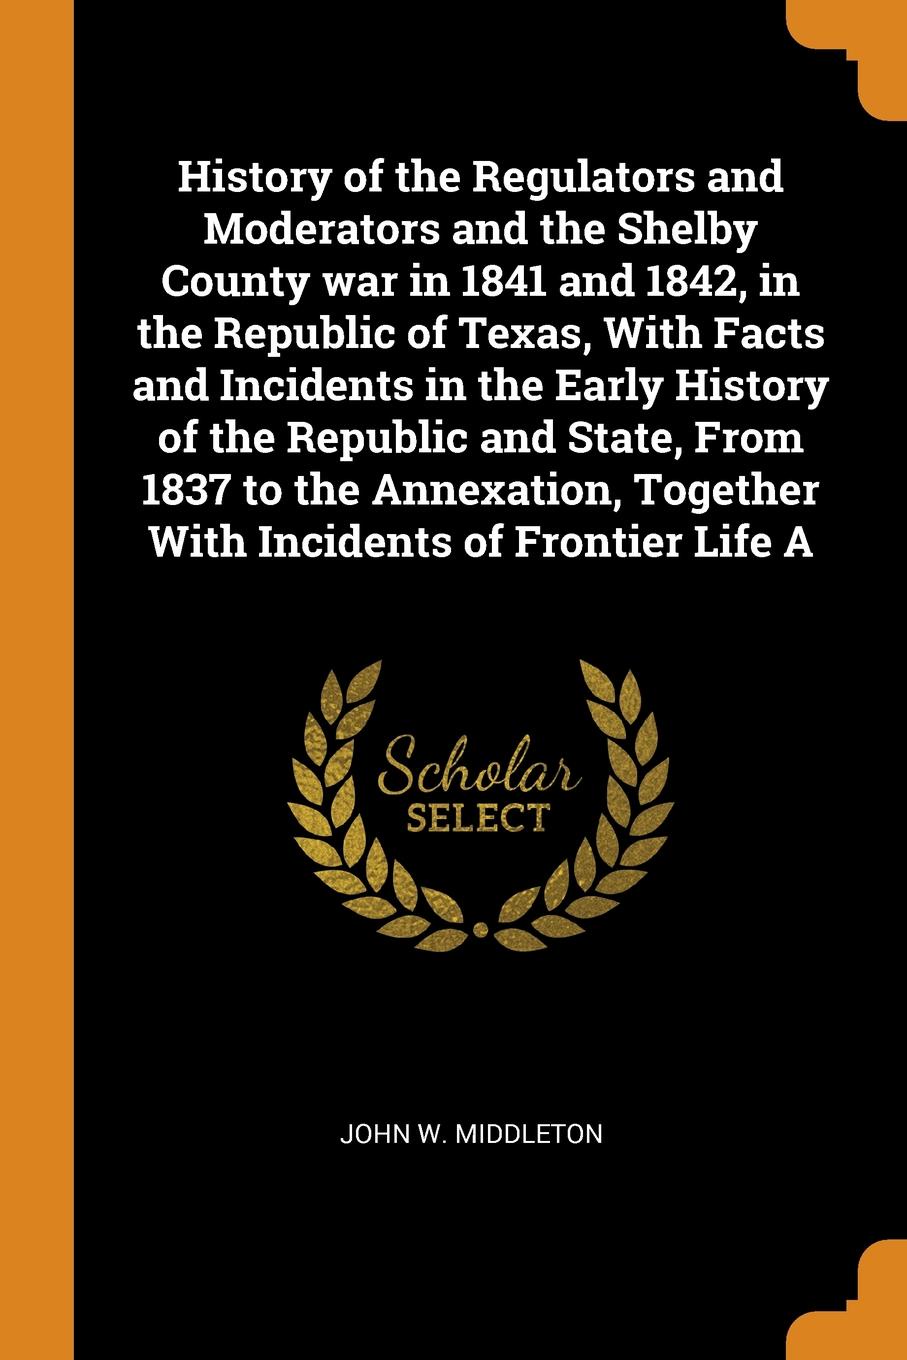 History of the Regulators and Moderators and the Shelby County war in 1841 and 1842, in the Republic of Texas, With Facts and Incidents in the Early History of the Republic and State, From 1837 to the Annexation, Together With Incidents of Frontie...